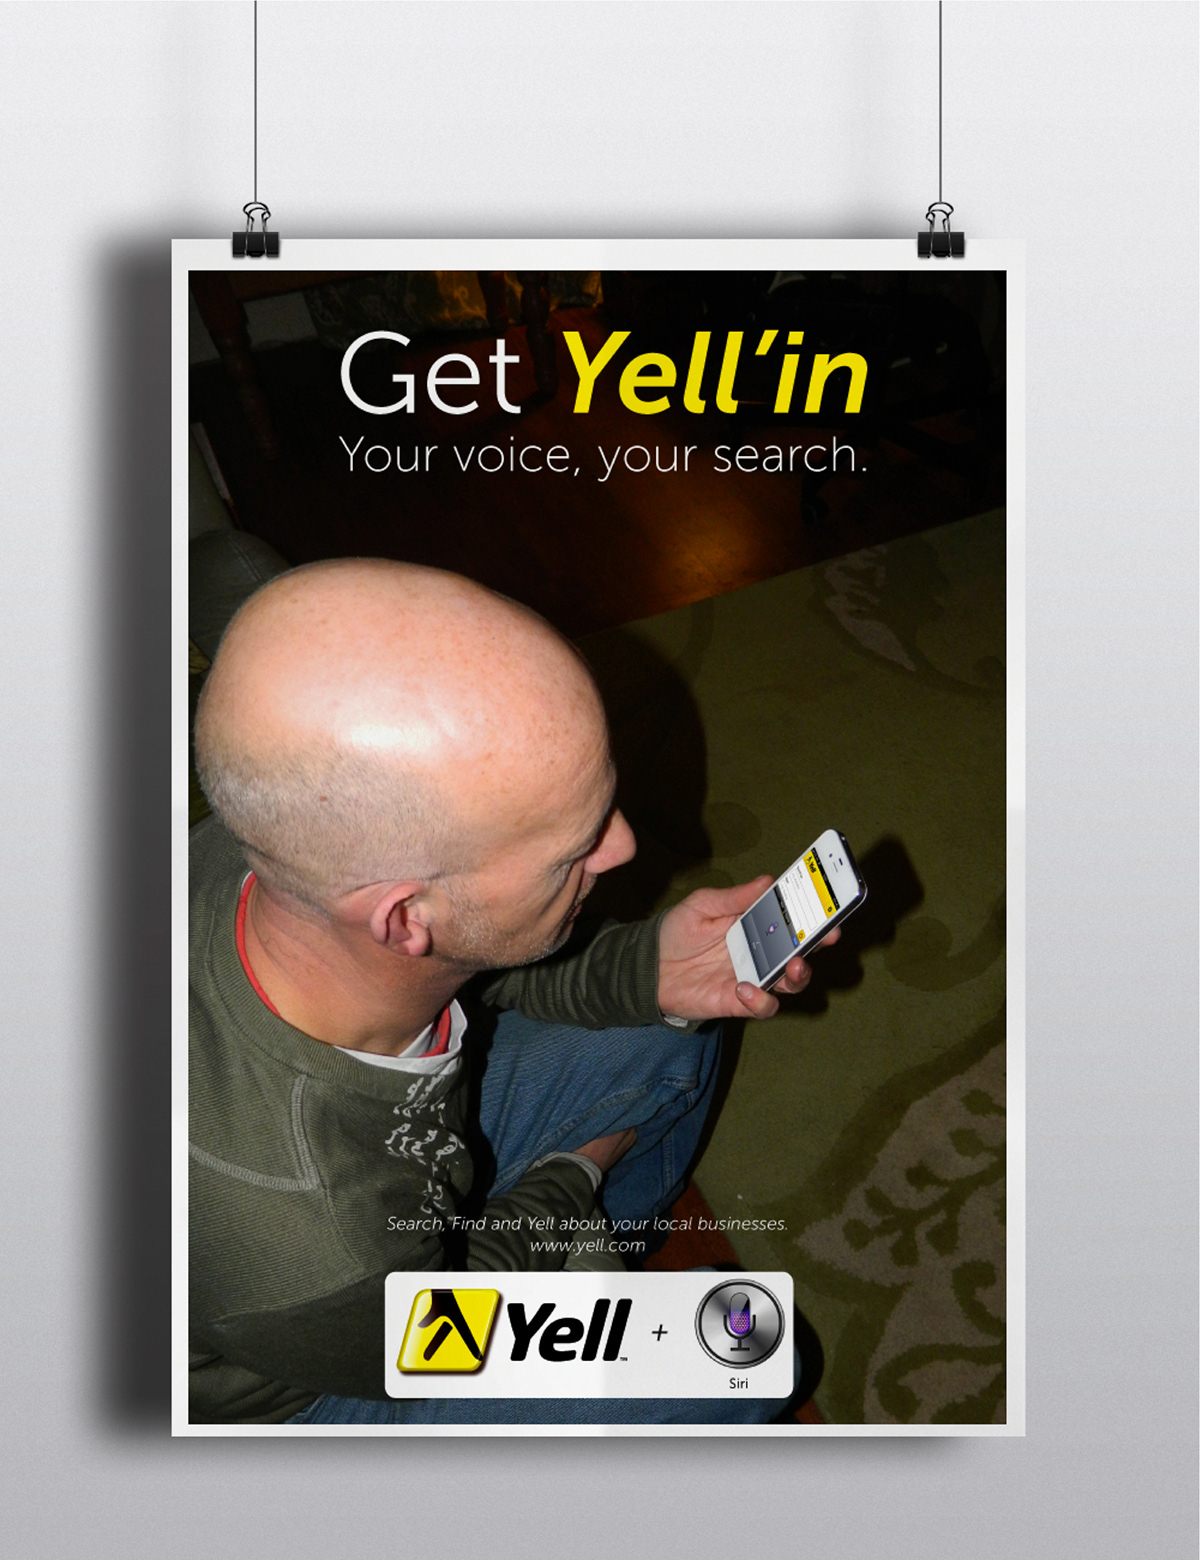 http://www.ycn.org/awards/ycn-student-awards/2012-2013/briefs/yell ycn yell Yell.com student awards Competition get yell'in Siri iphone voice search